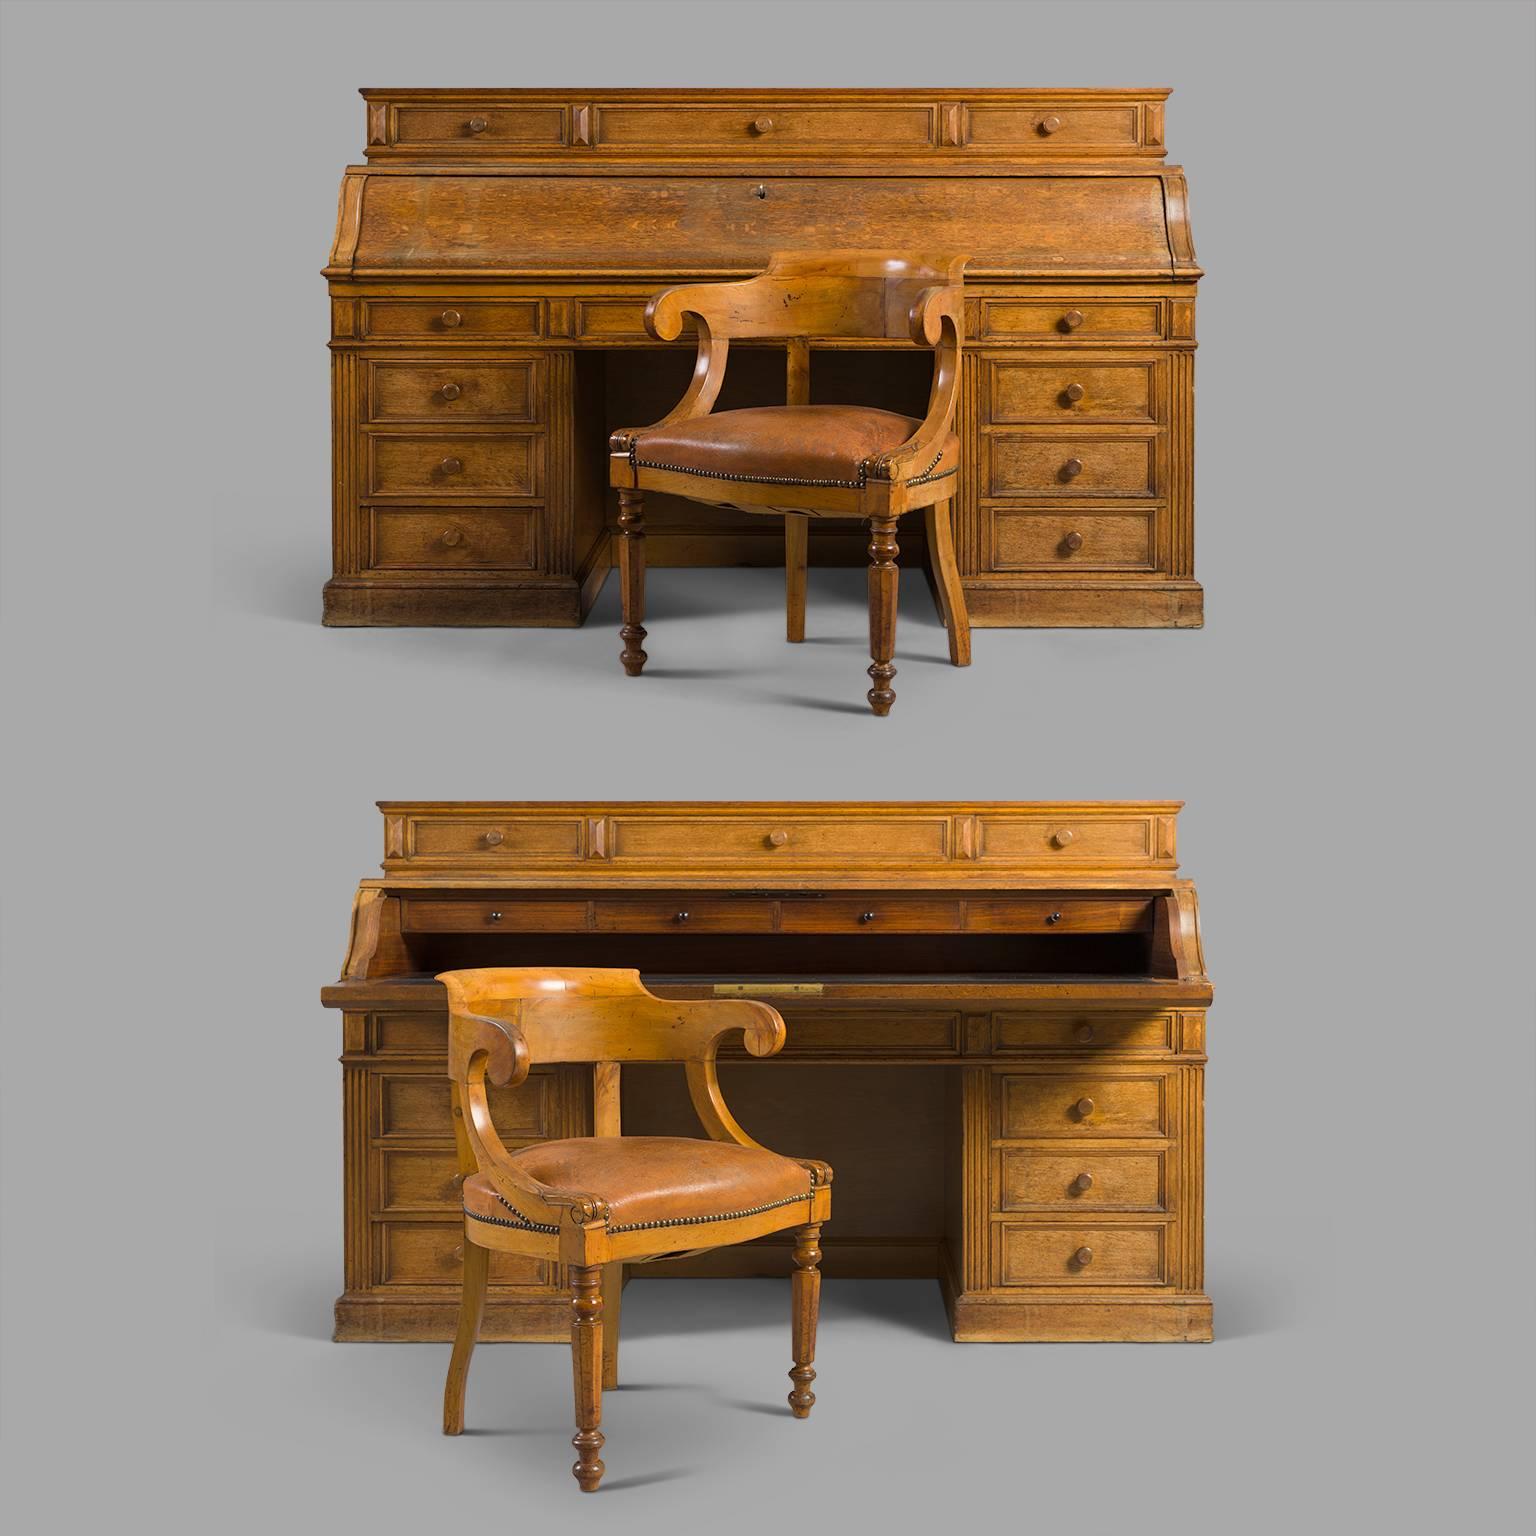 Oak desks, interior drawers and plate in rosewood veneer, leather blotter.
When opening, or closing the plate, a mechanism system allows locking or unlocking upper and lower drawers. Walnut armchairs with leather seating.
 
Some wear consistent